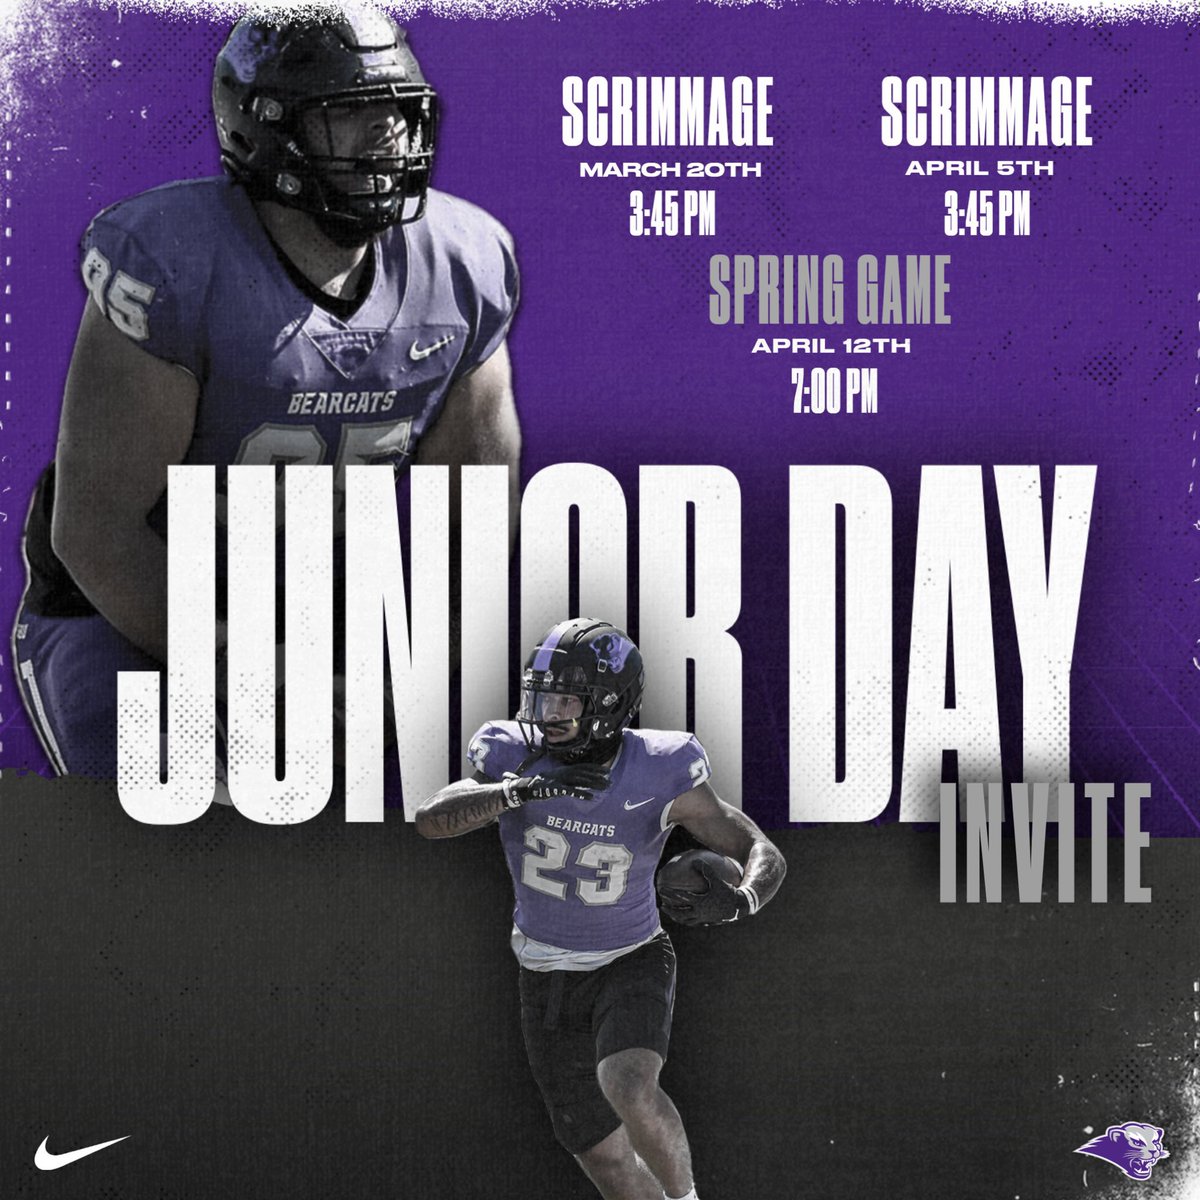 Thank you for the junior day invite!💜 @CoachTCurts